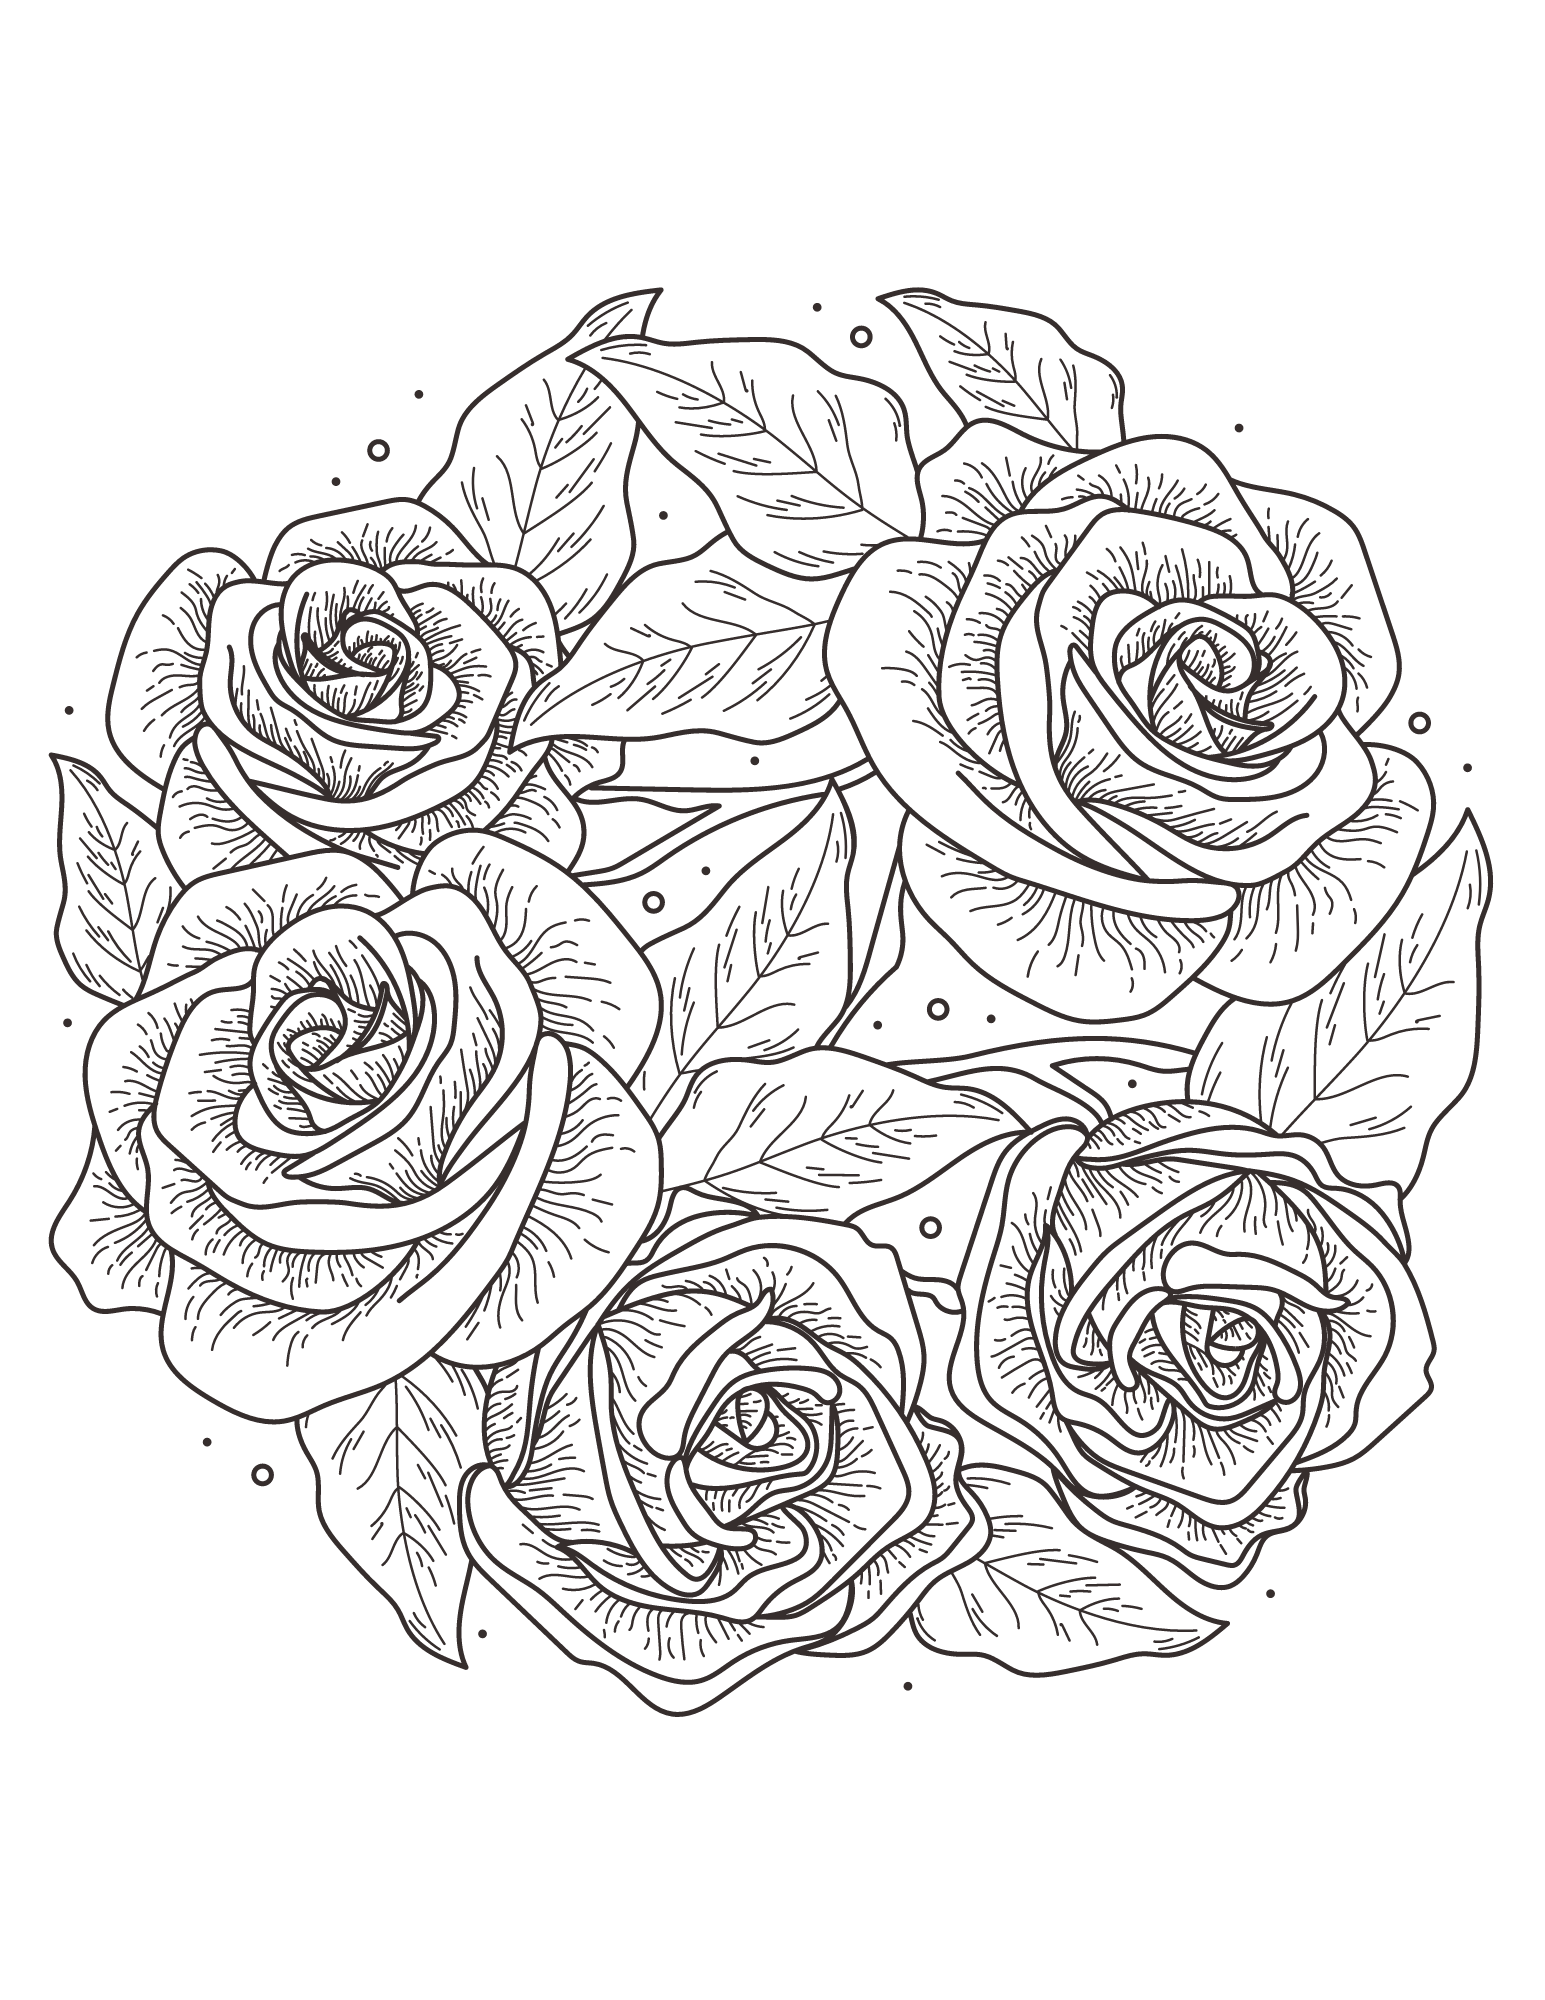 Free printable rose coloring pages for kids and adults